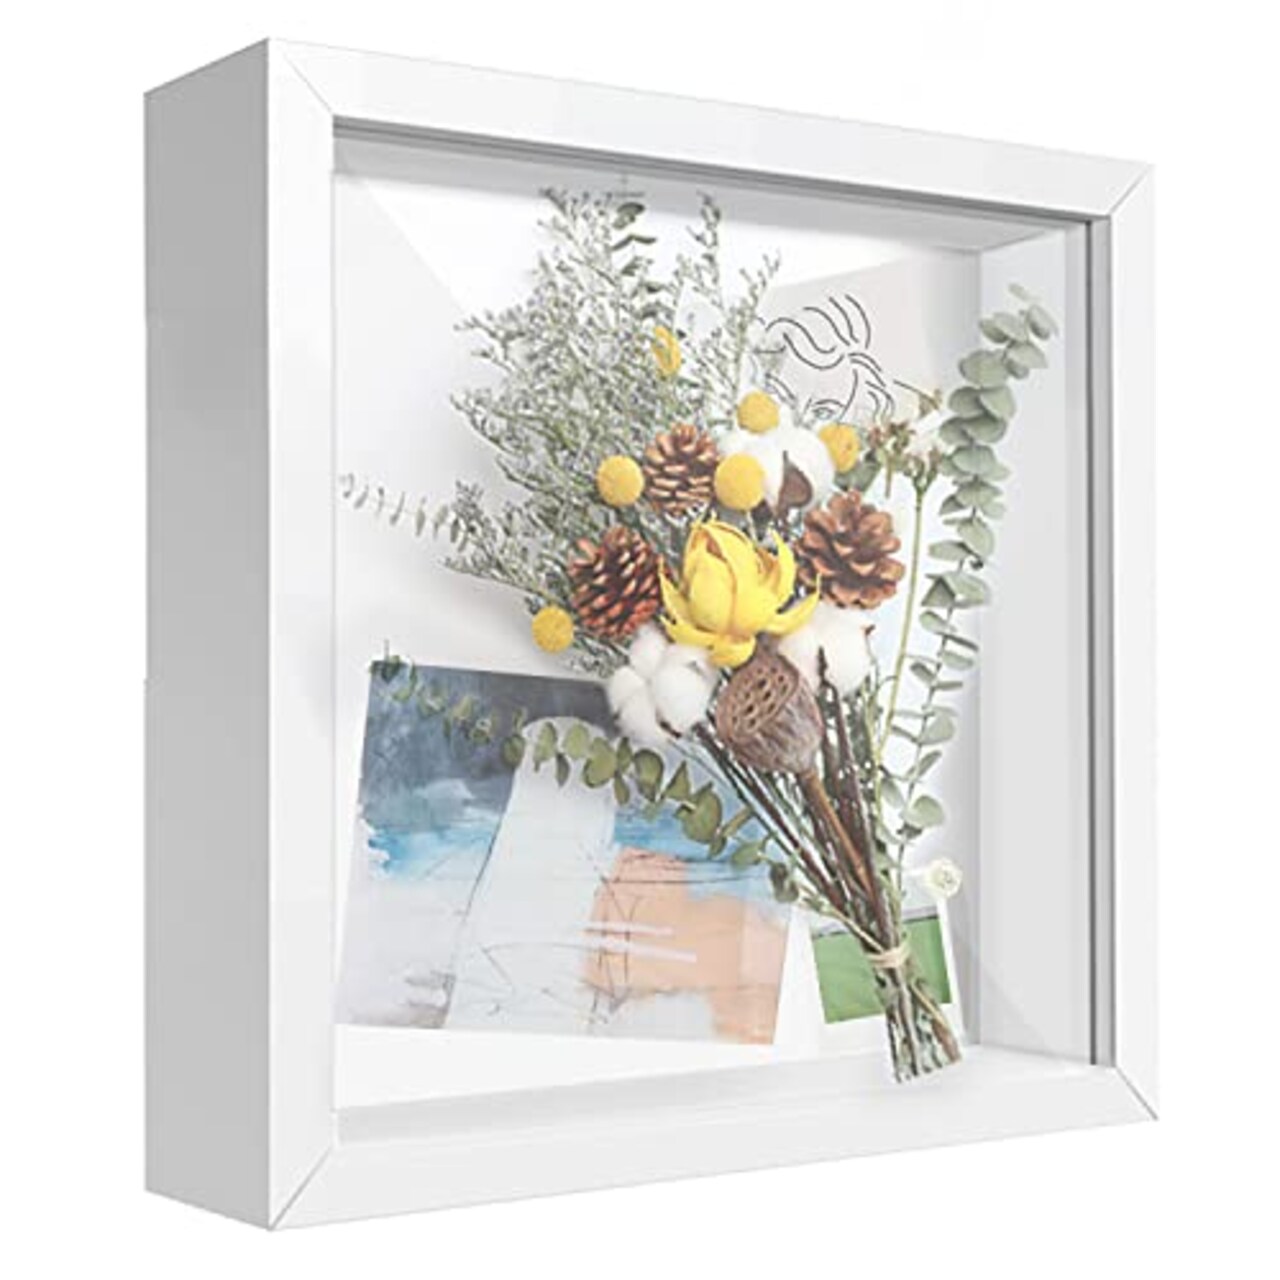 TouYinger 8x8 Shadow Box Frame Display Case with Letter Stickers